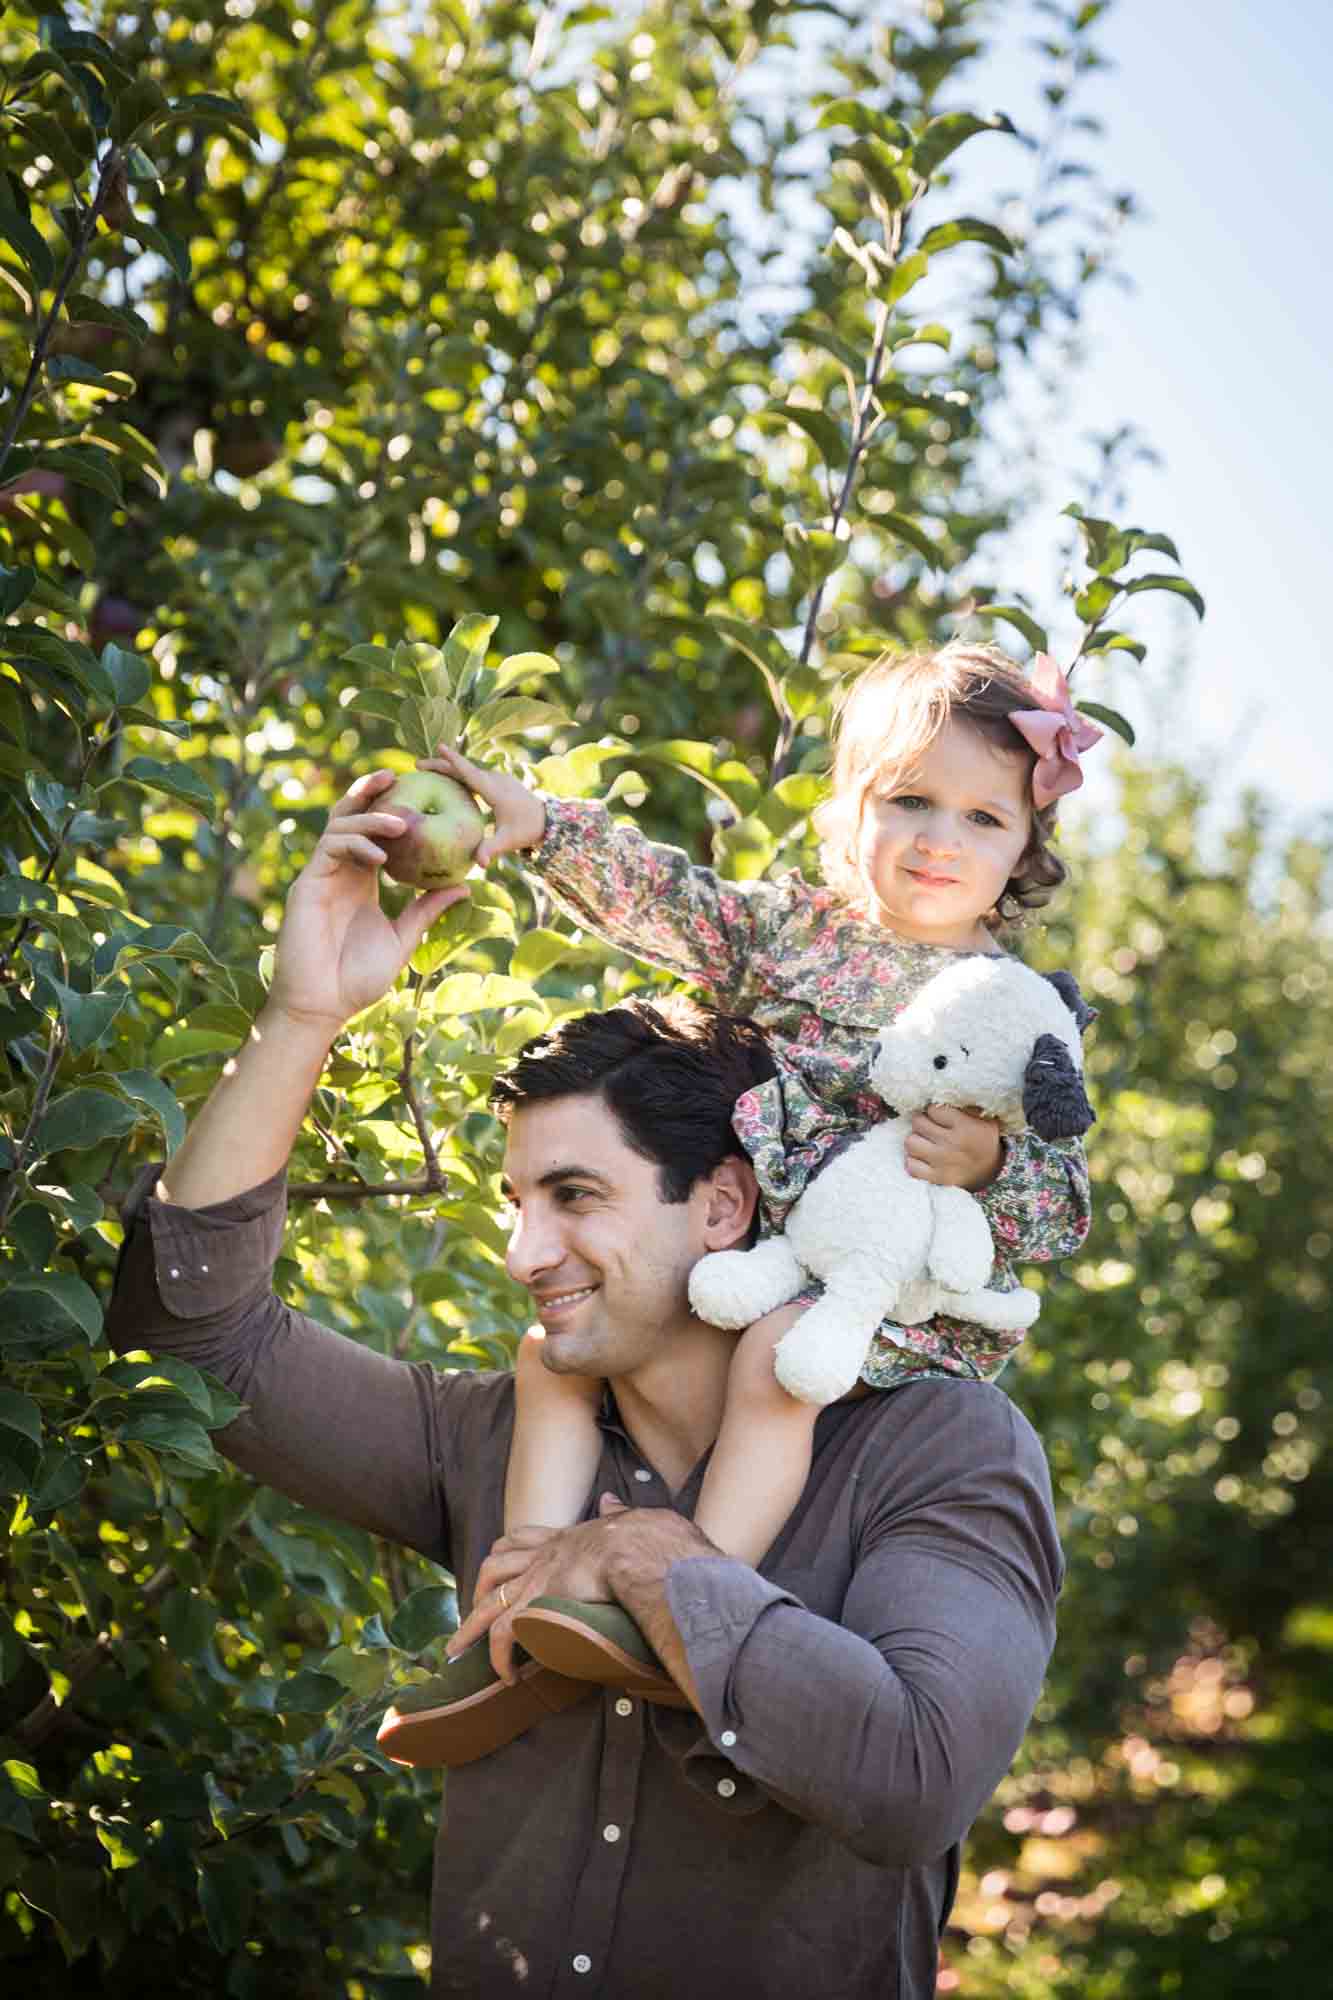 Father handing apple to little girl on his shoulders